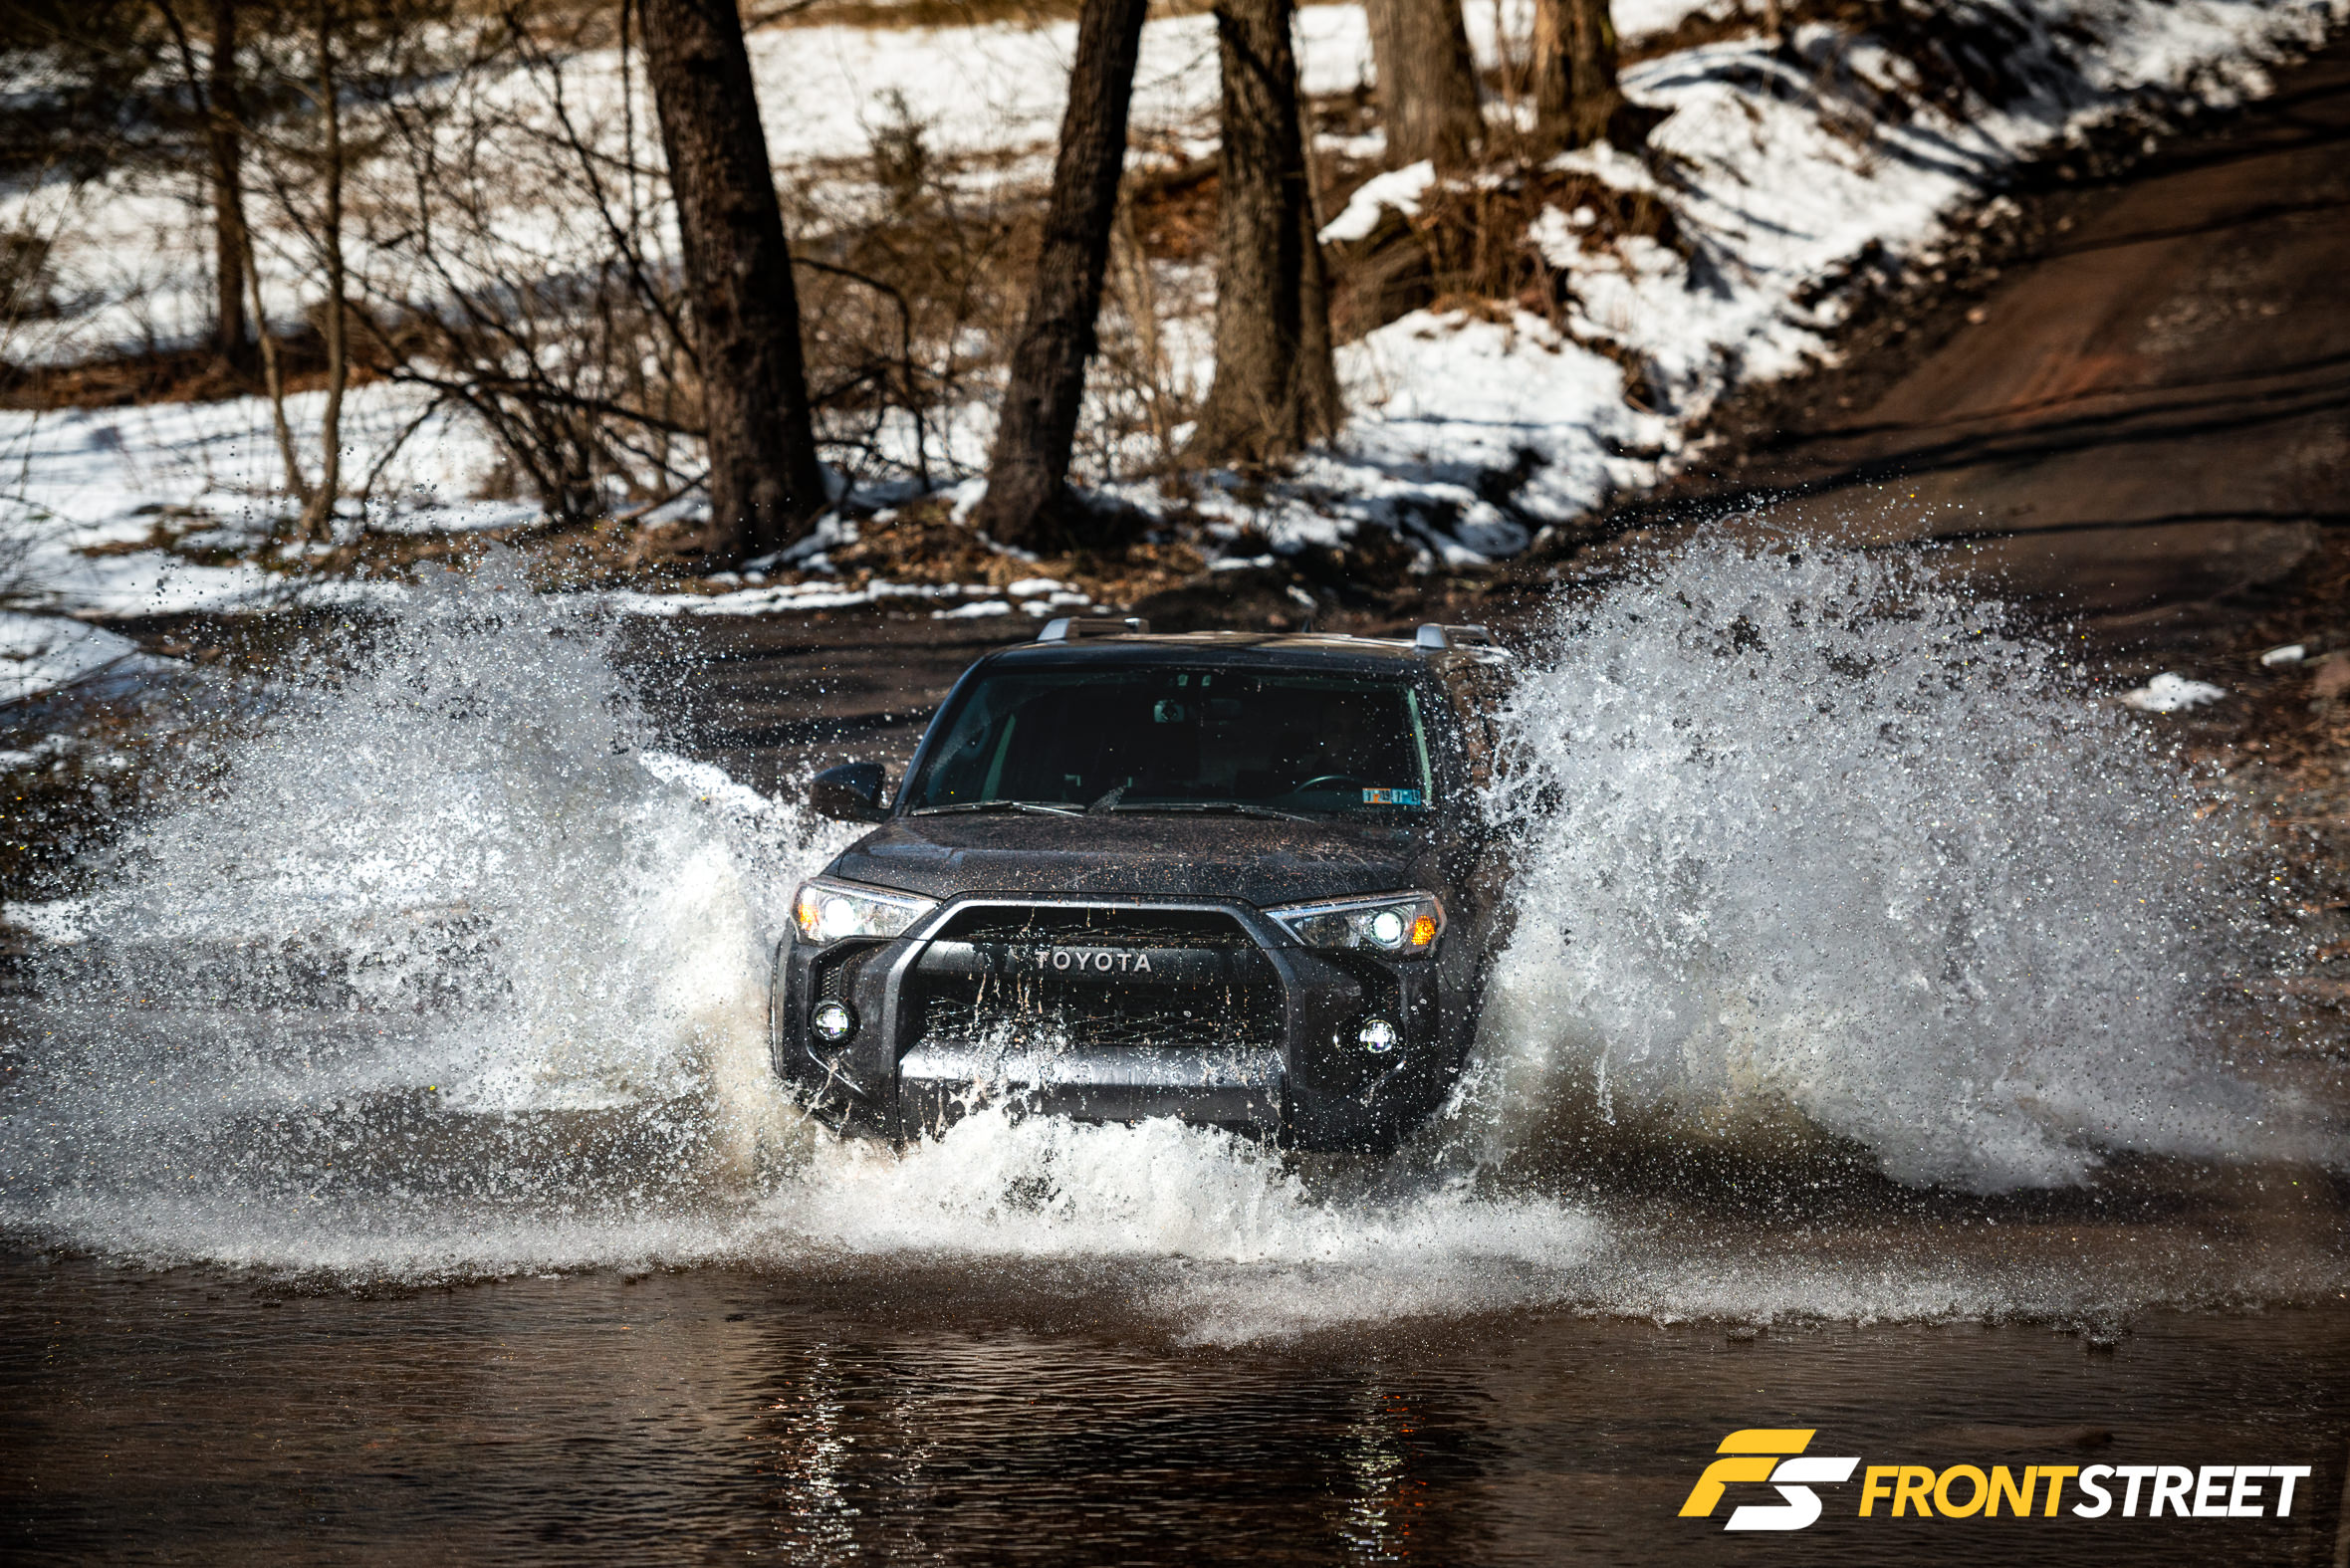 This Is How We Do It: Upgrading Toyota's 4Runner For Off-Road Fun